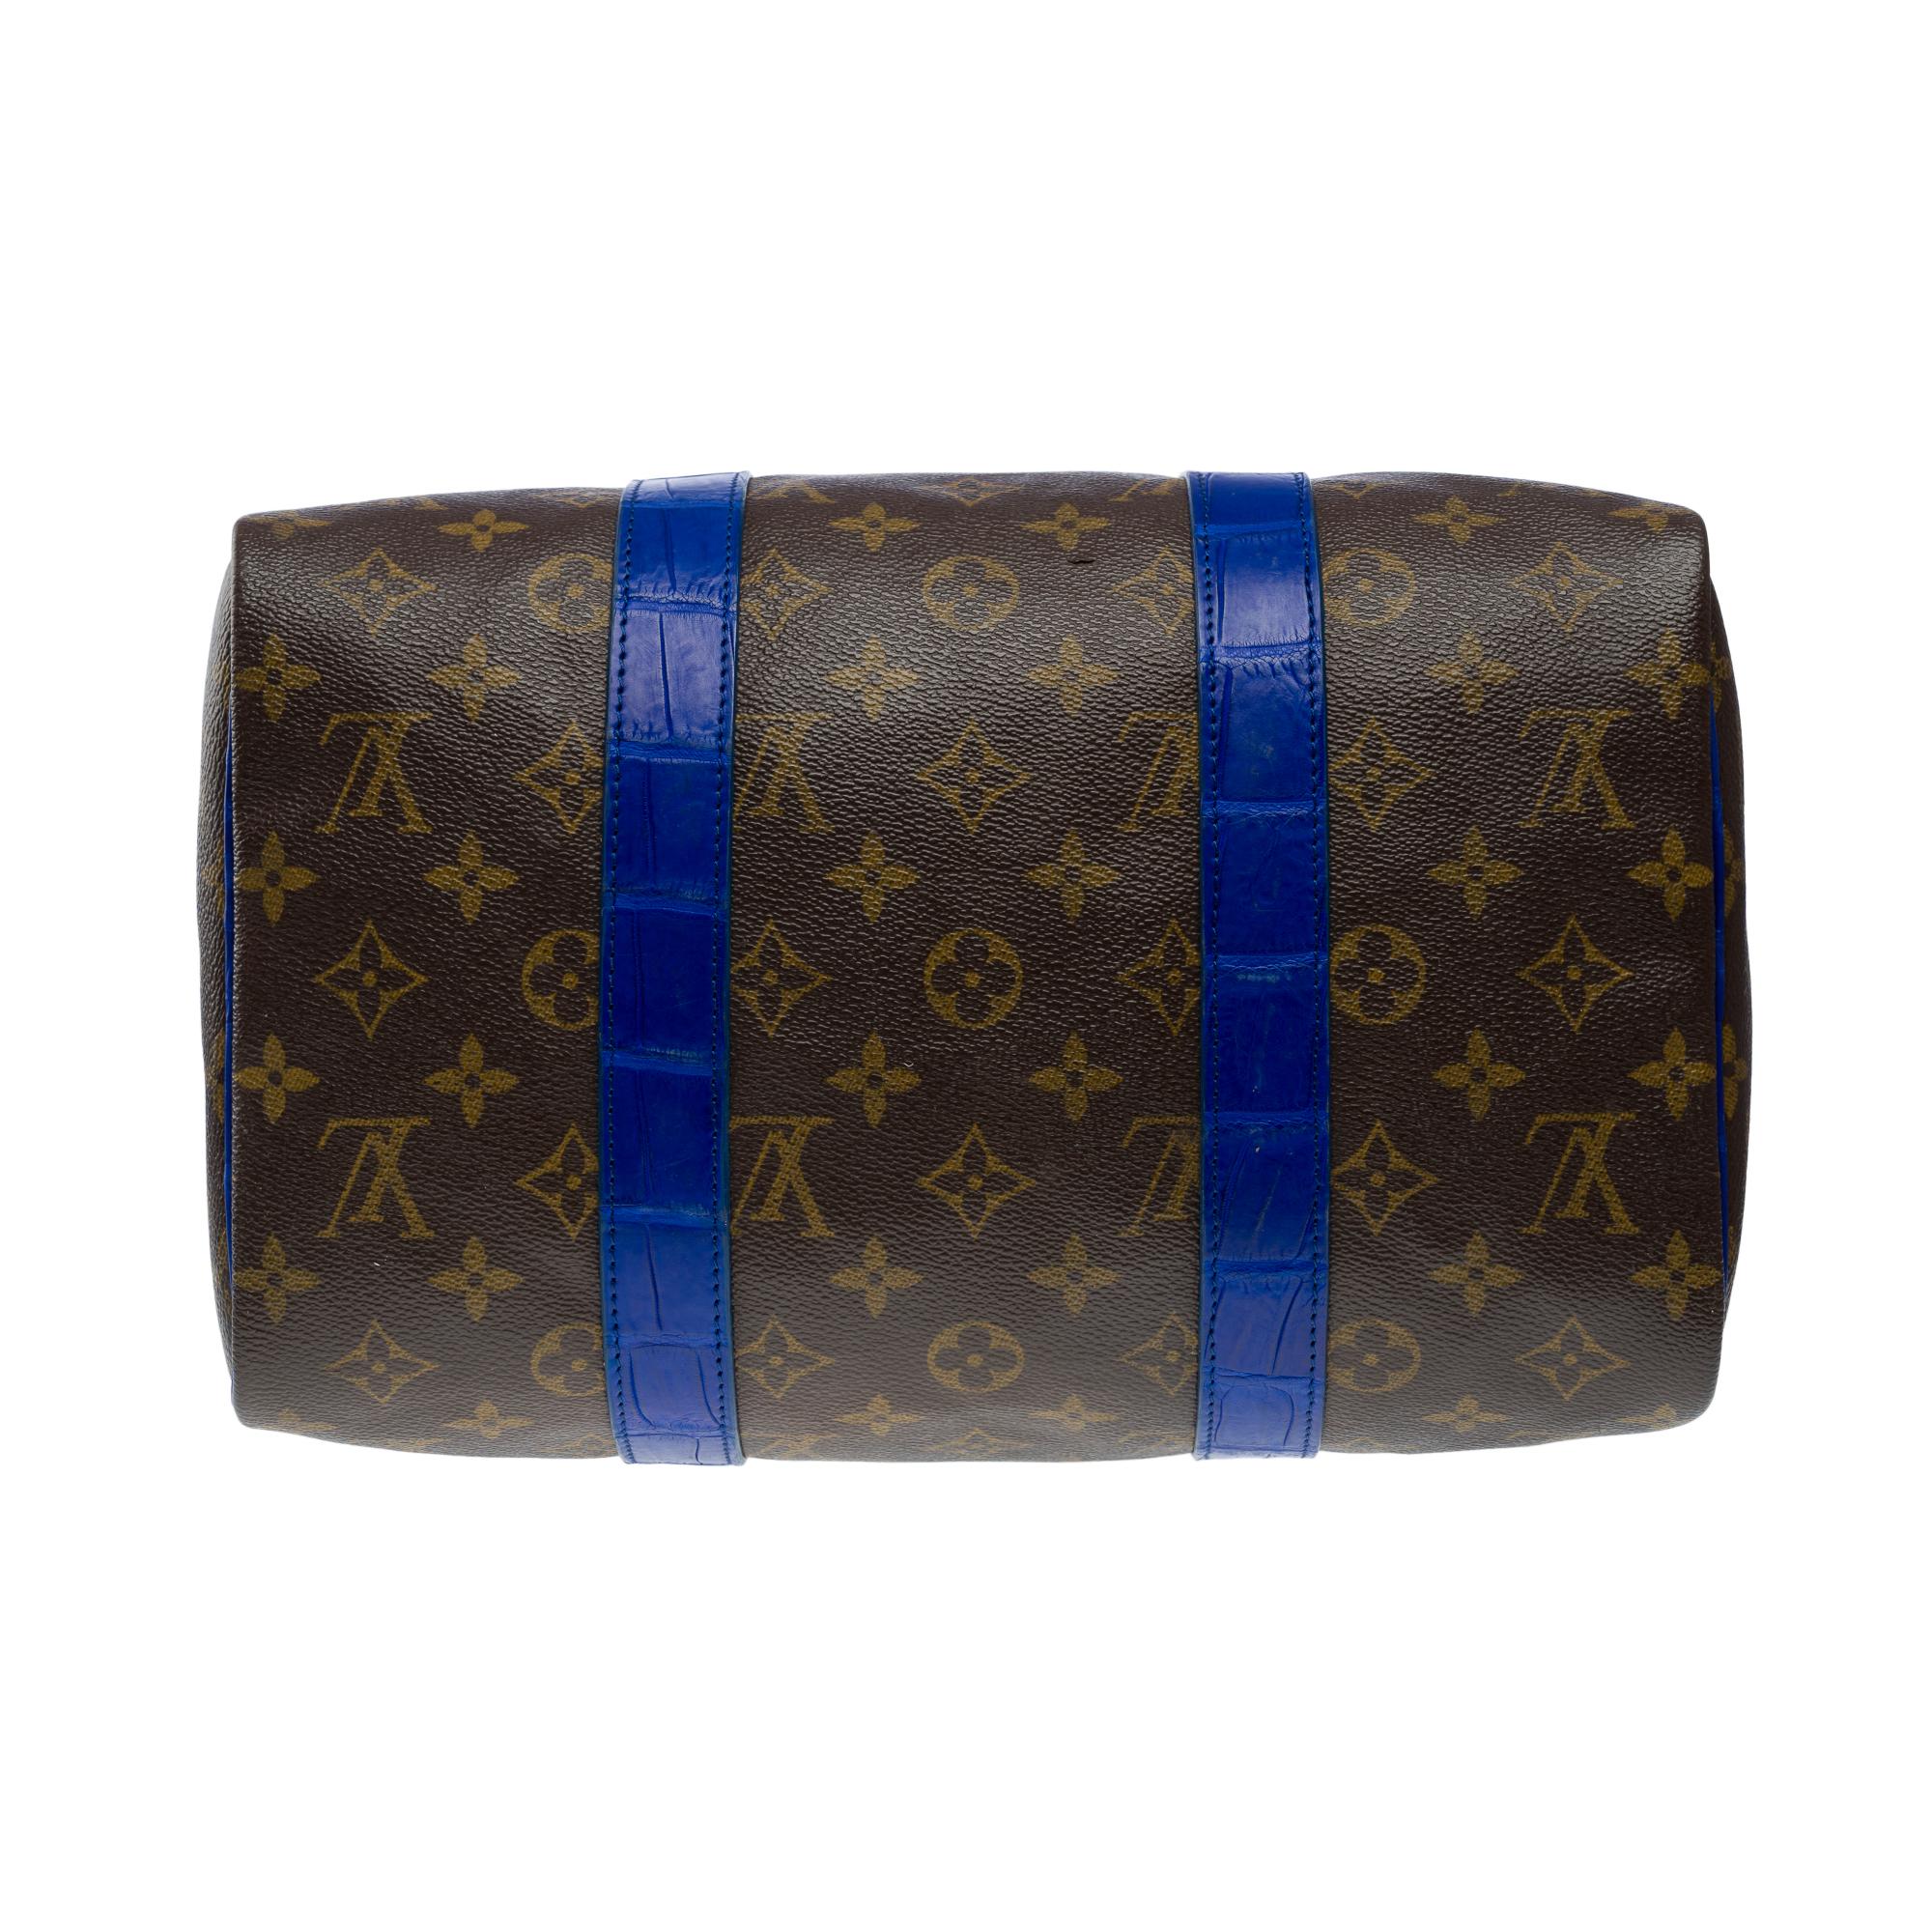 Customized Louis Vuitton Speedy 30 handbag Butterfly with Blue Crocodile leather For Sale 4